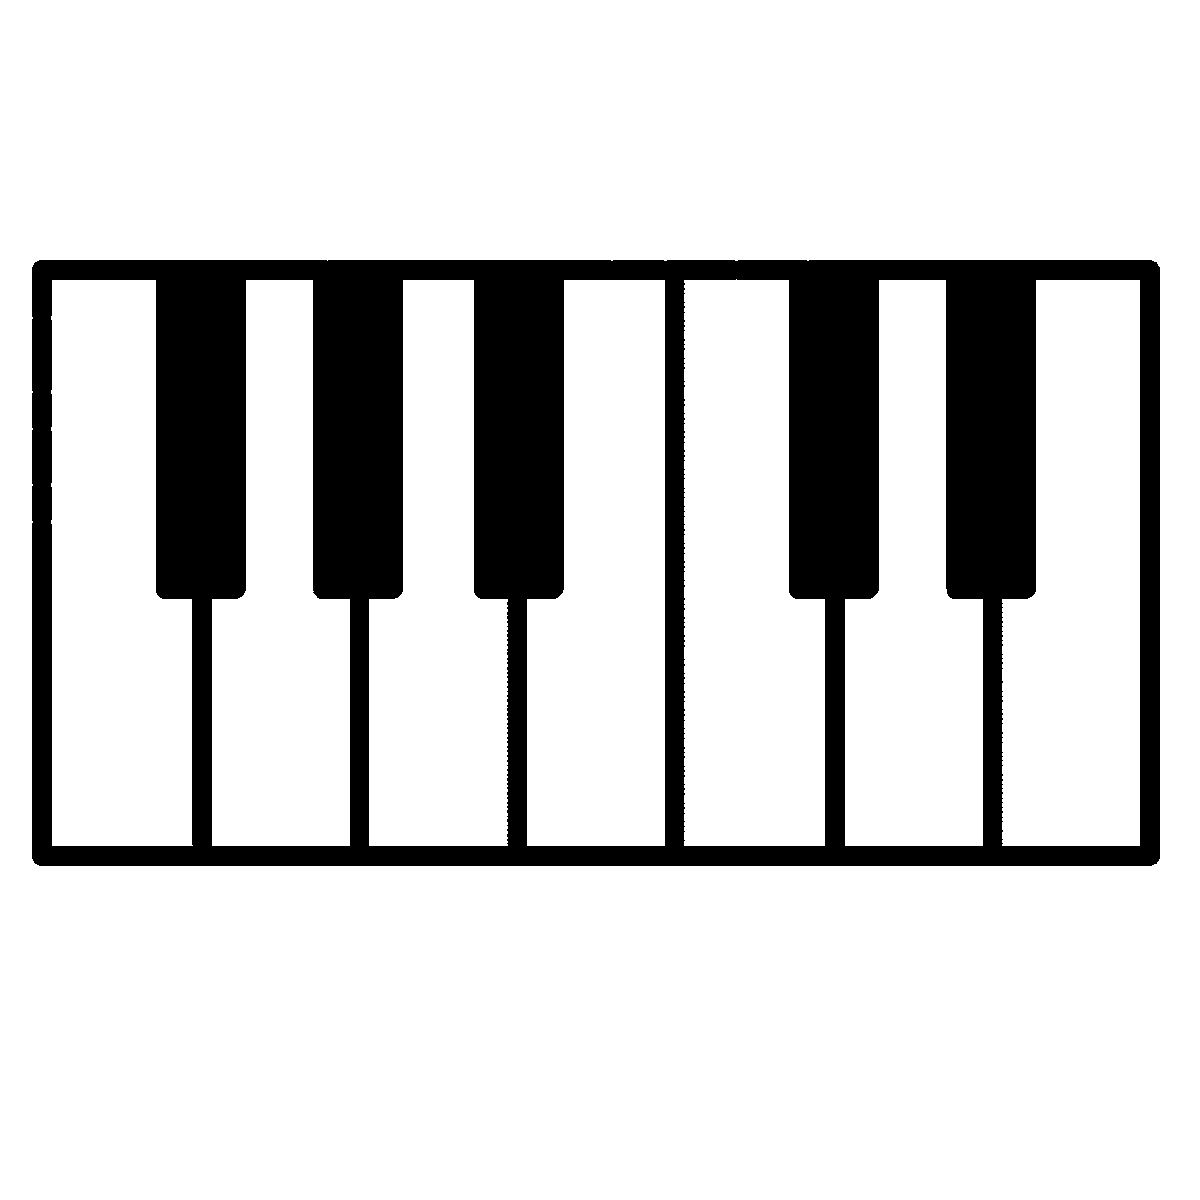 Upright piano clipart free clipart images